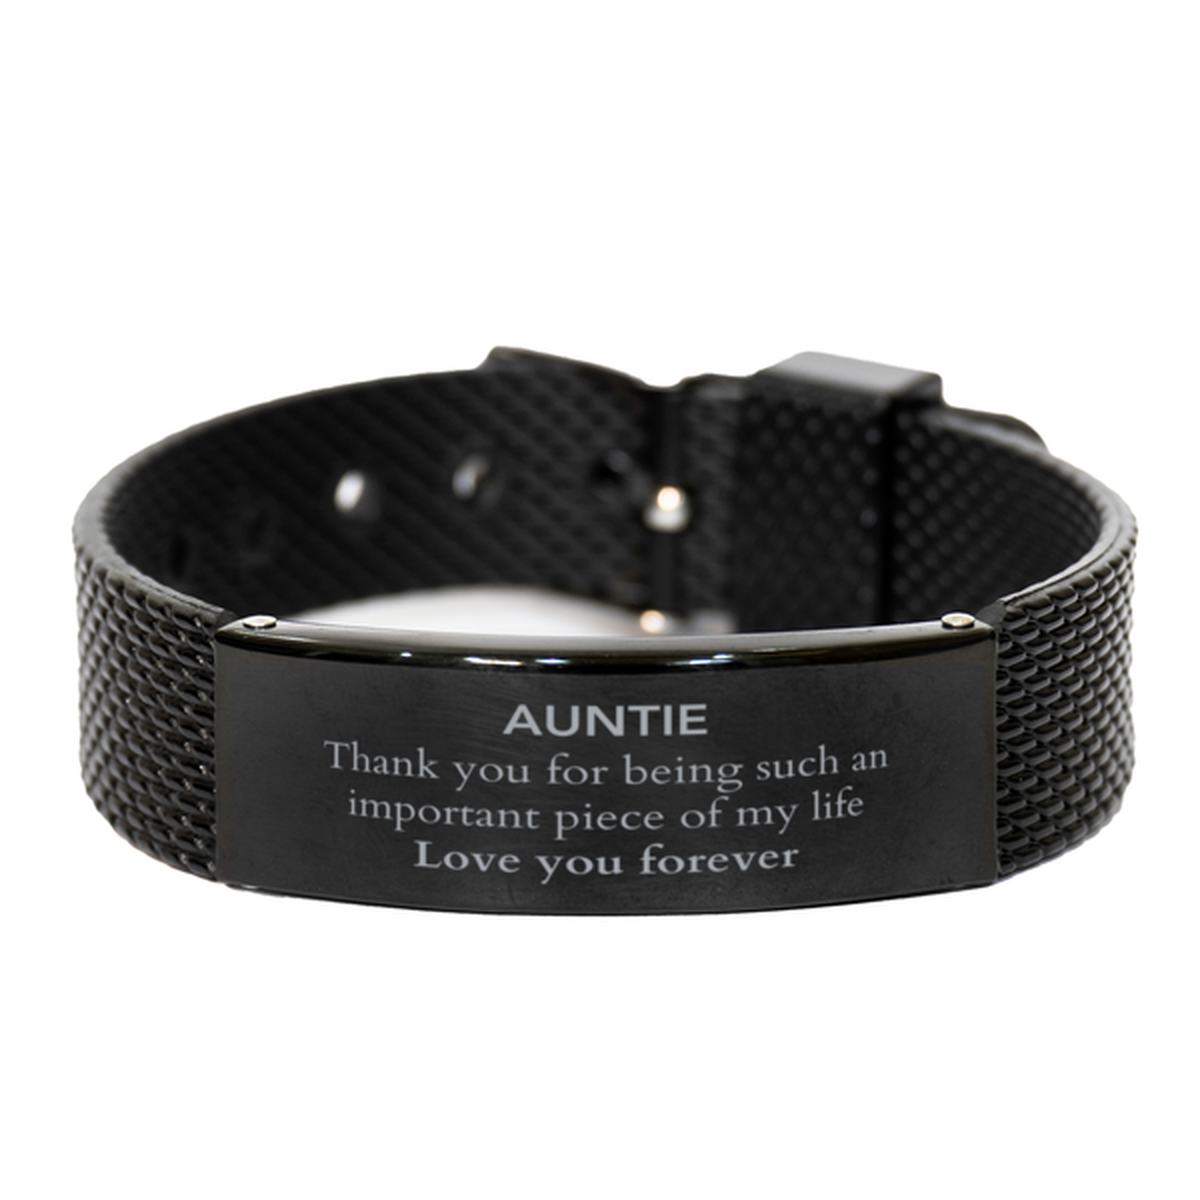 Appropriate Auntie Black Shark Mesh Bracelet Epic Birthday Gifts for Auntie Thank you for being such an important piece of my life Auntie Christmas Mothers Fathers Day